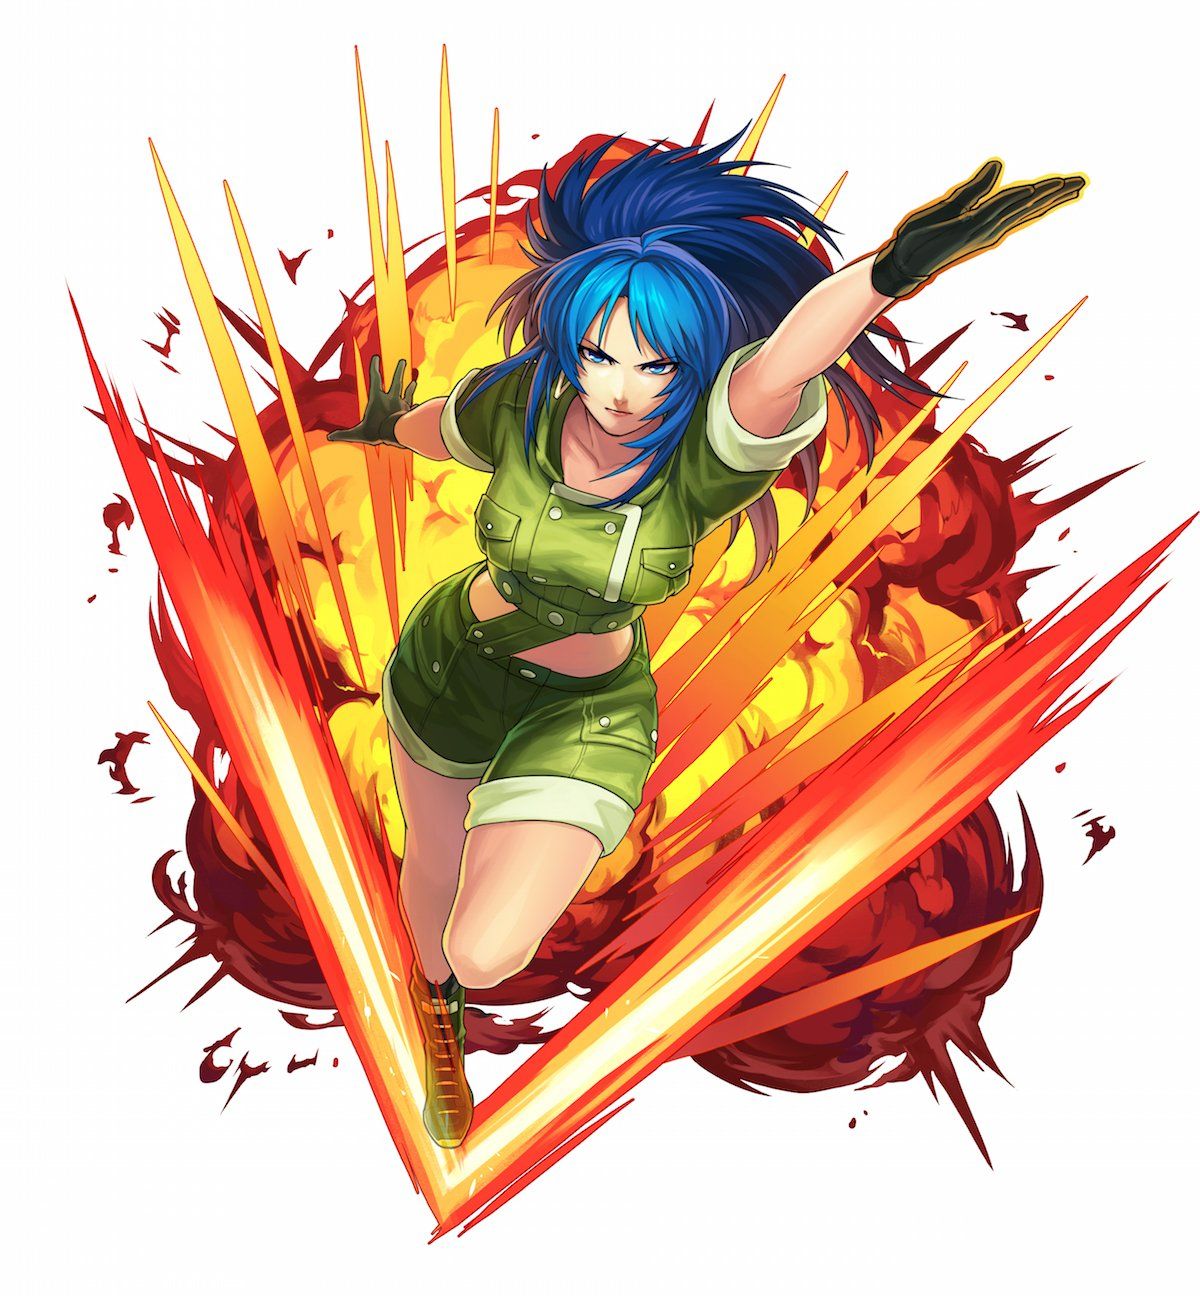 Leona Heidern (The King of Fighters)